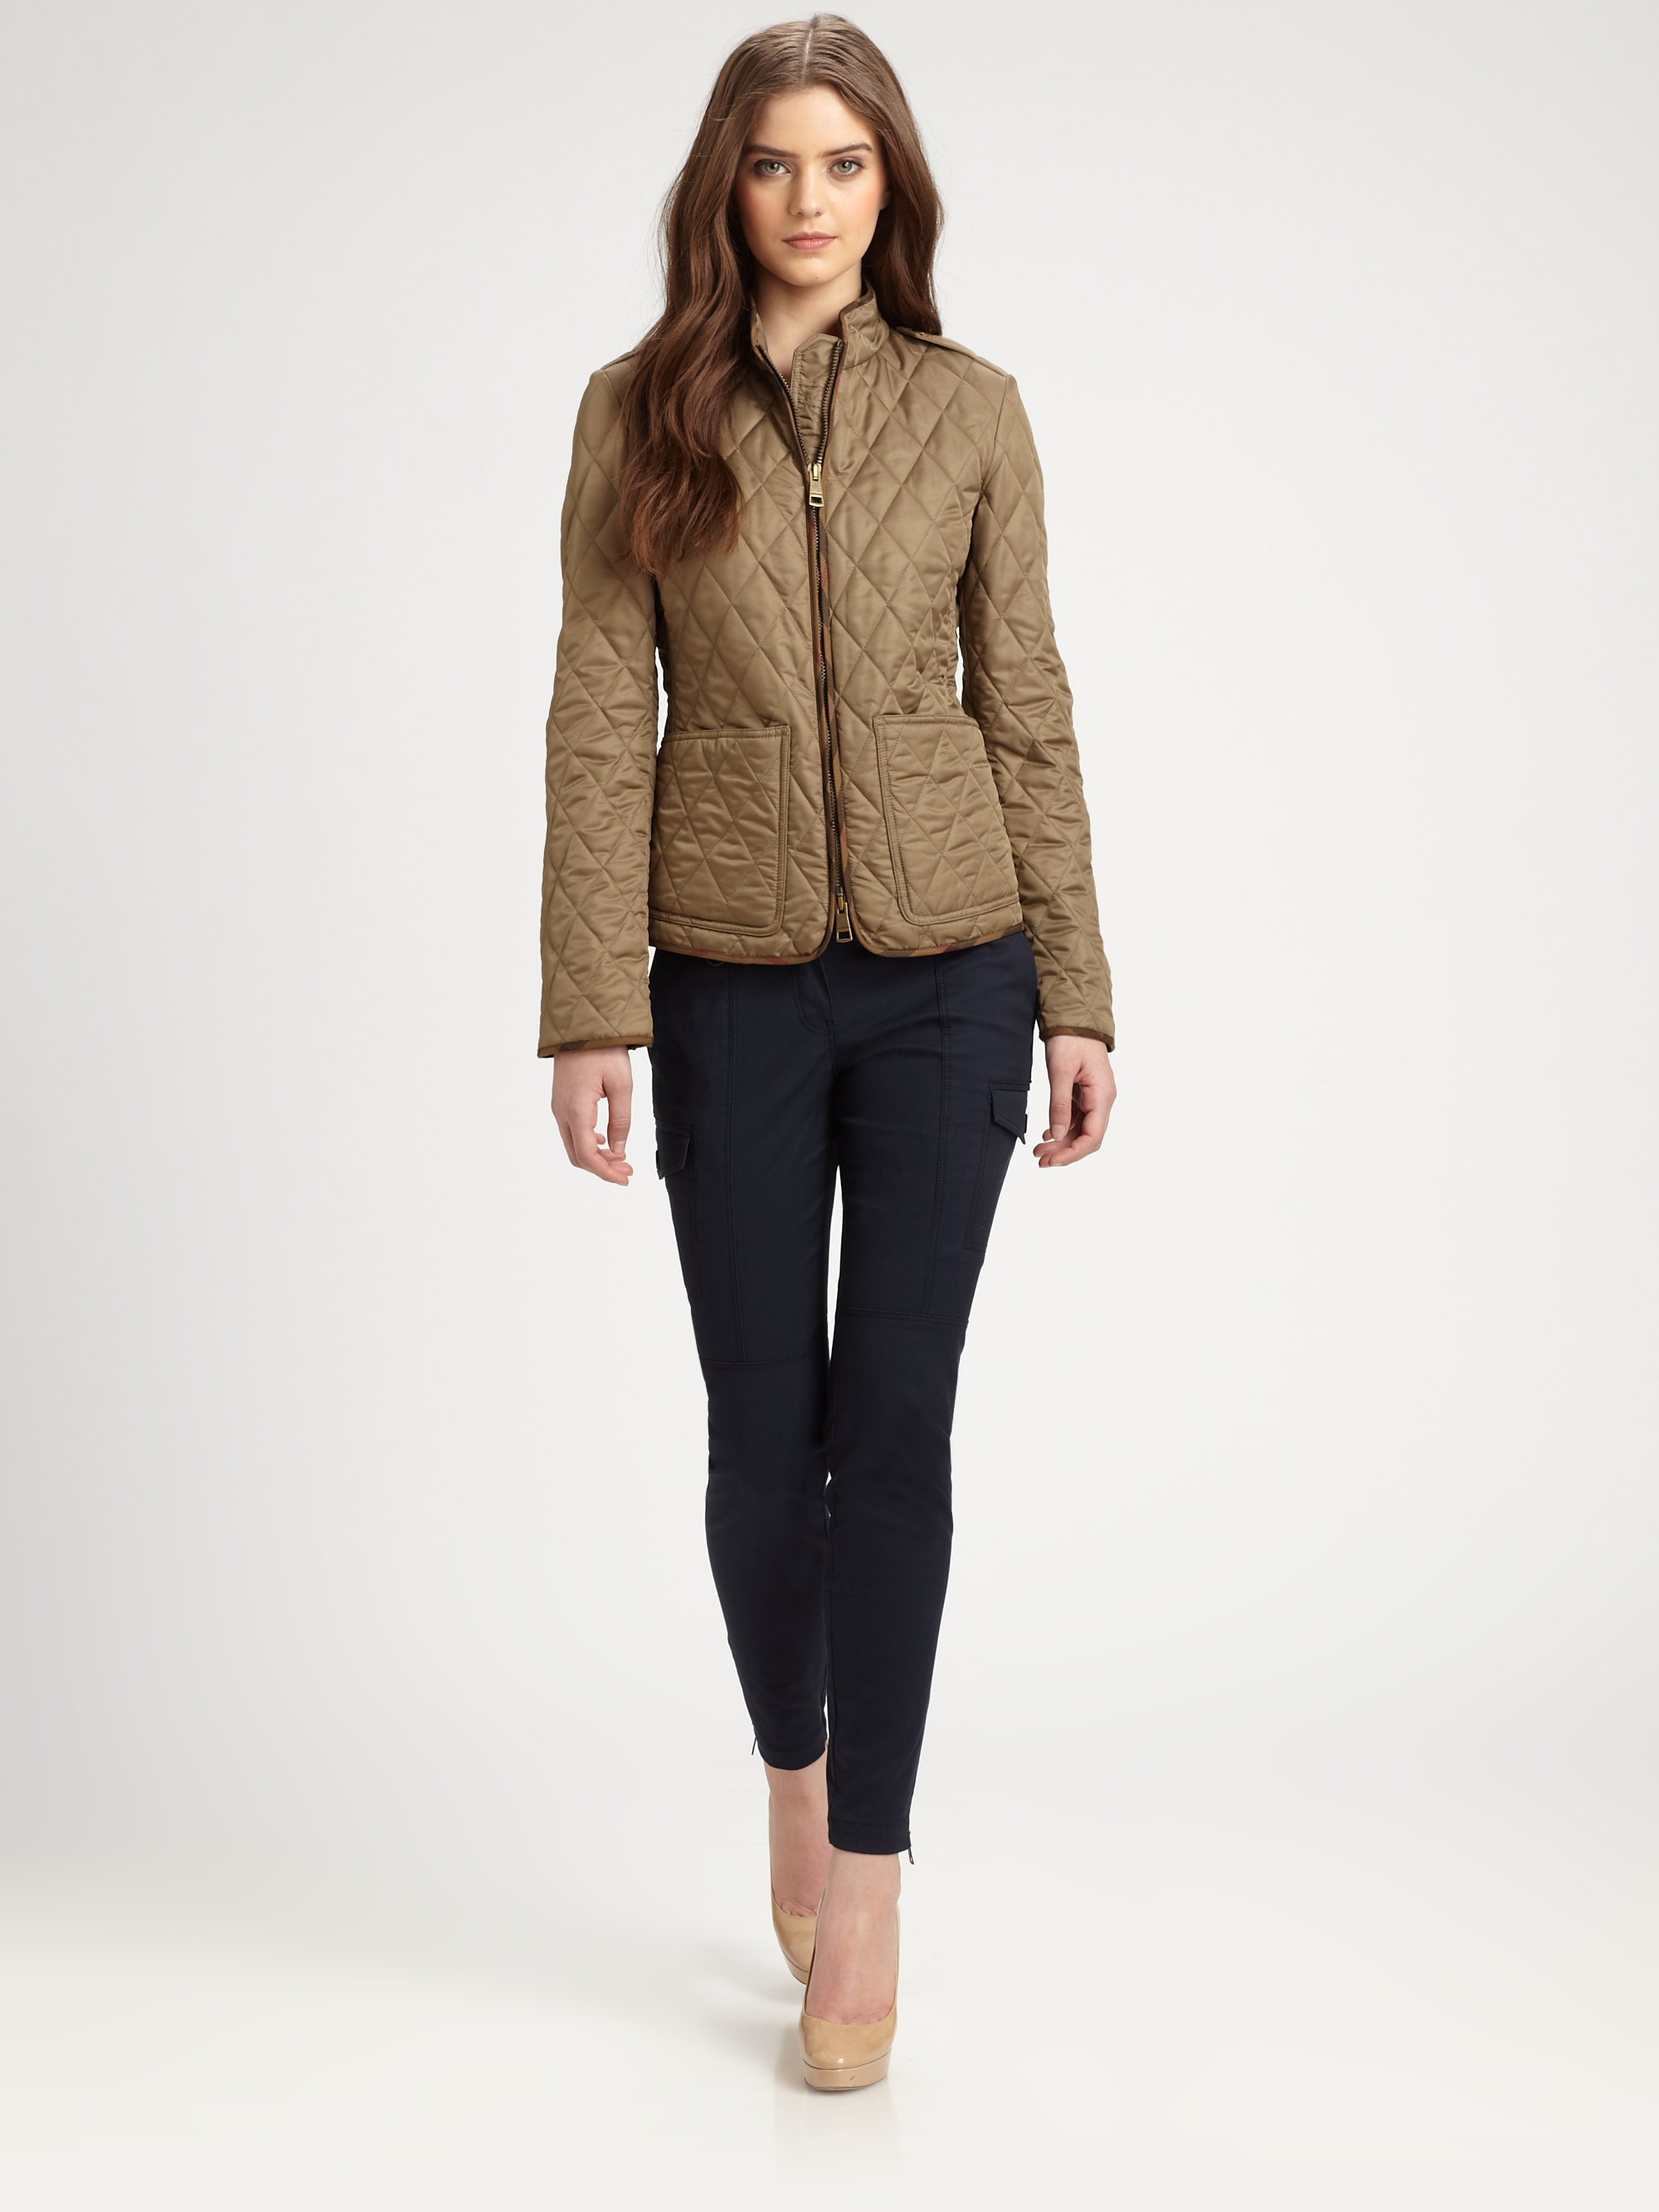 Lyst - Burberry Brit Edgefield Quilted Jacket in Brown